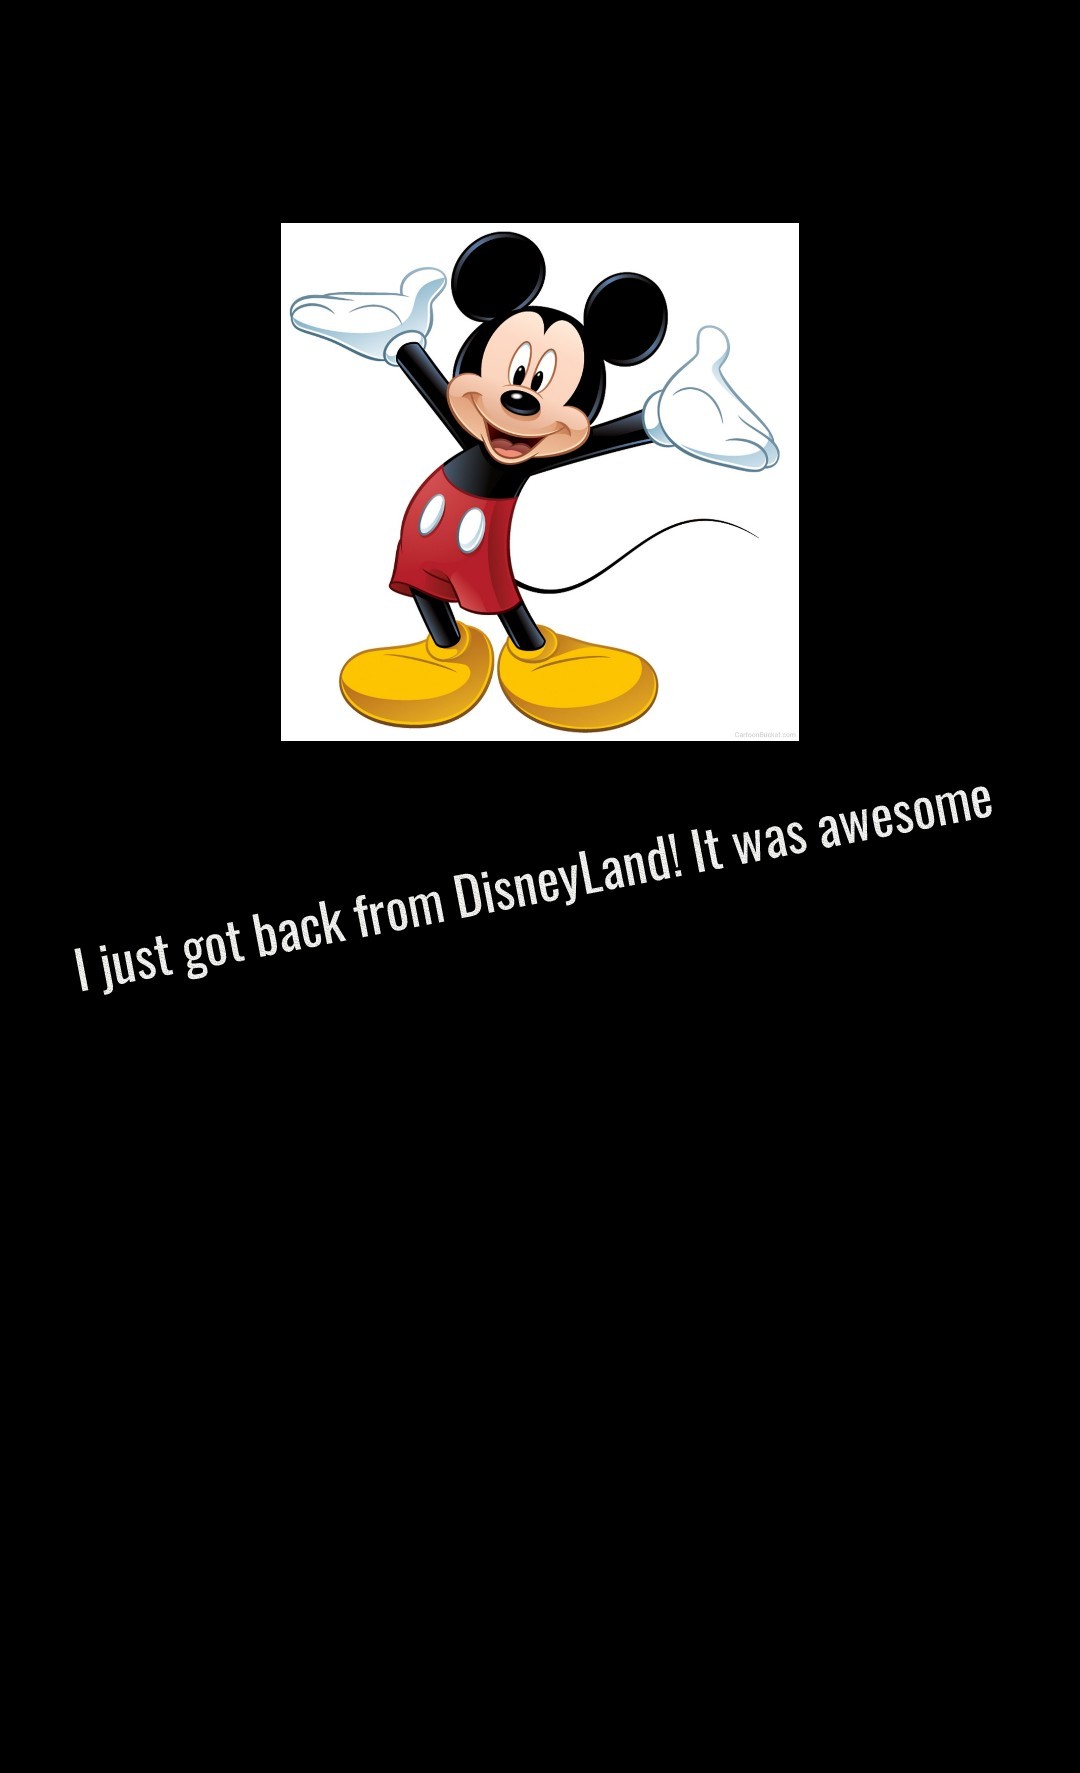 I just got back from DisneyLand! It was awesome 